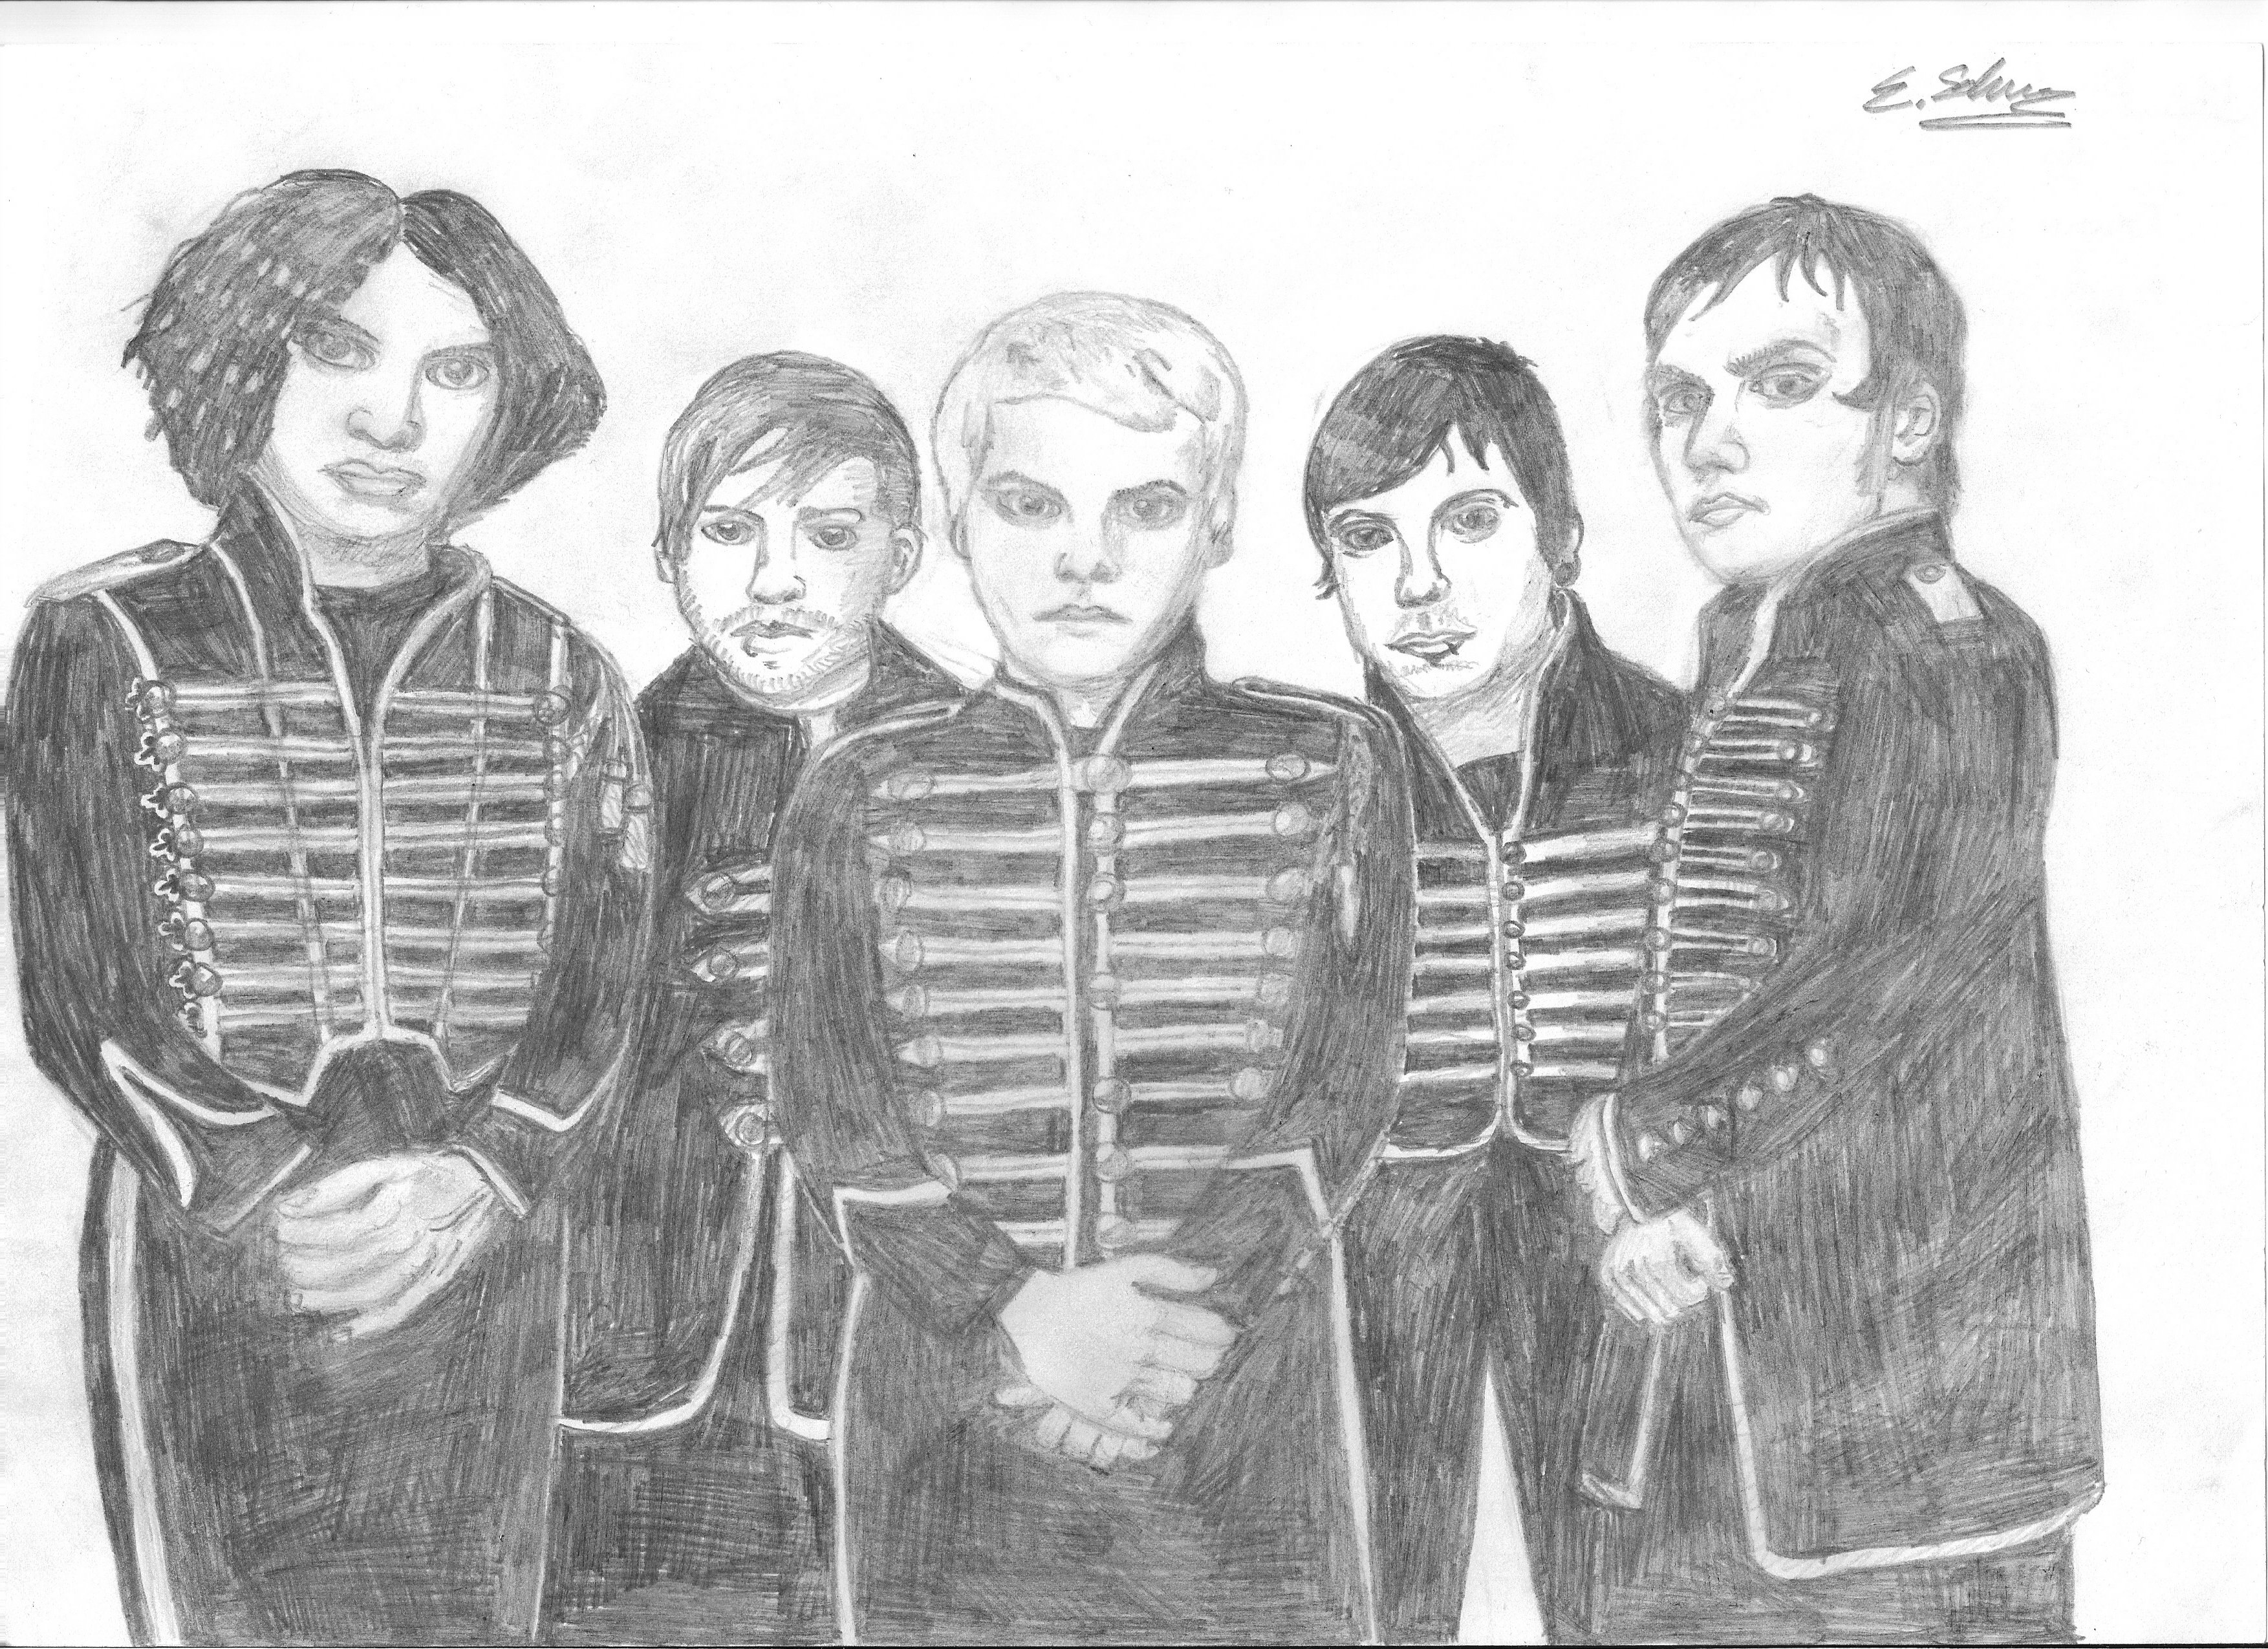 The Black Parade by gerards_third_wife